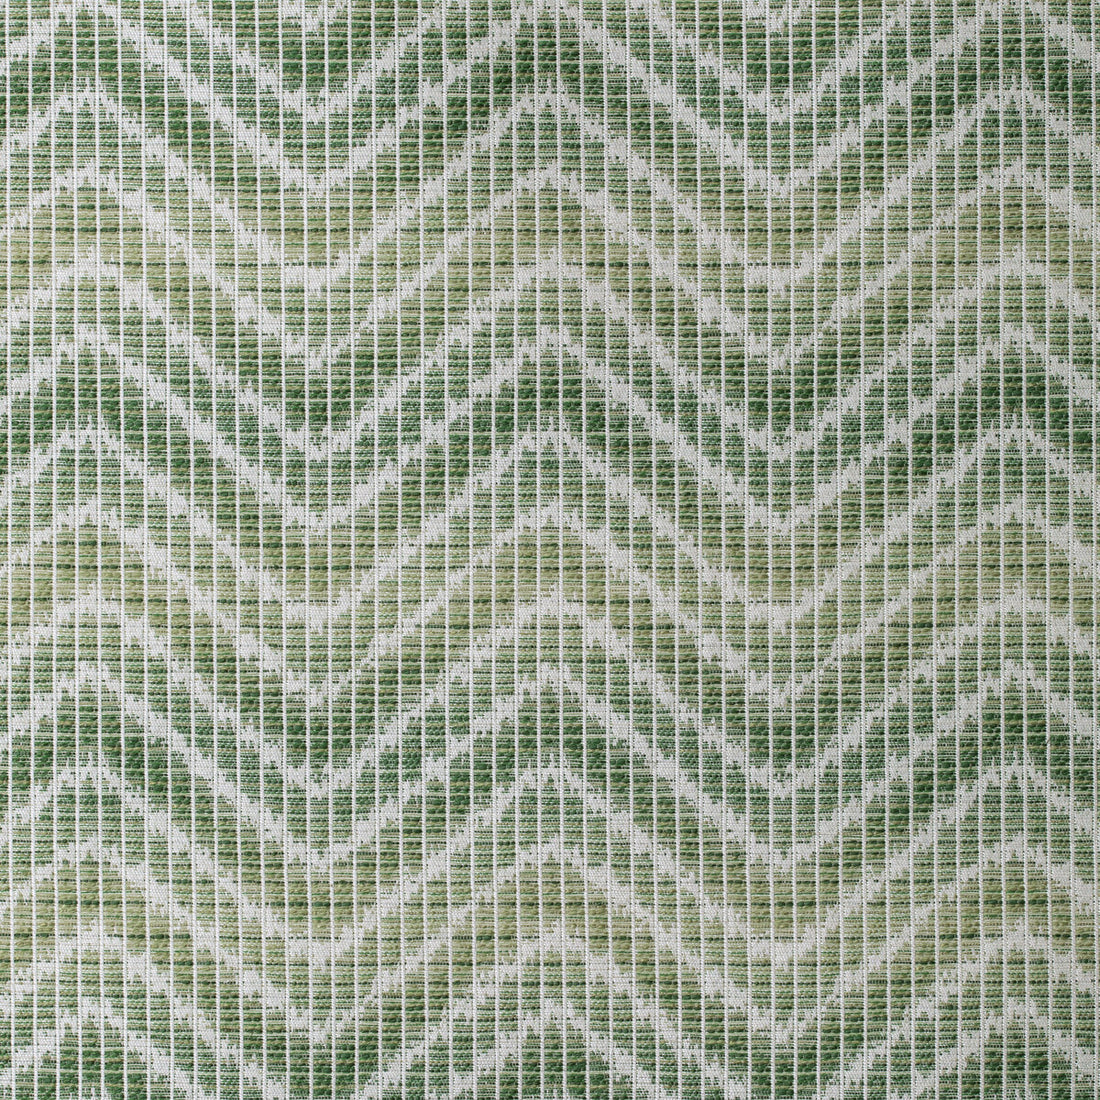 Chausey Woven fabric in leaf color - pattern SP-CHAUSEY.3.0 - by Kravet Design